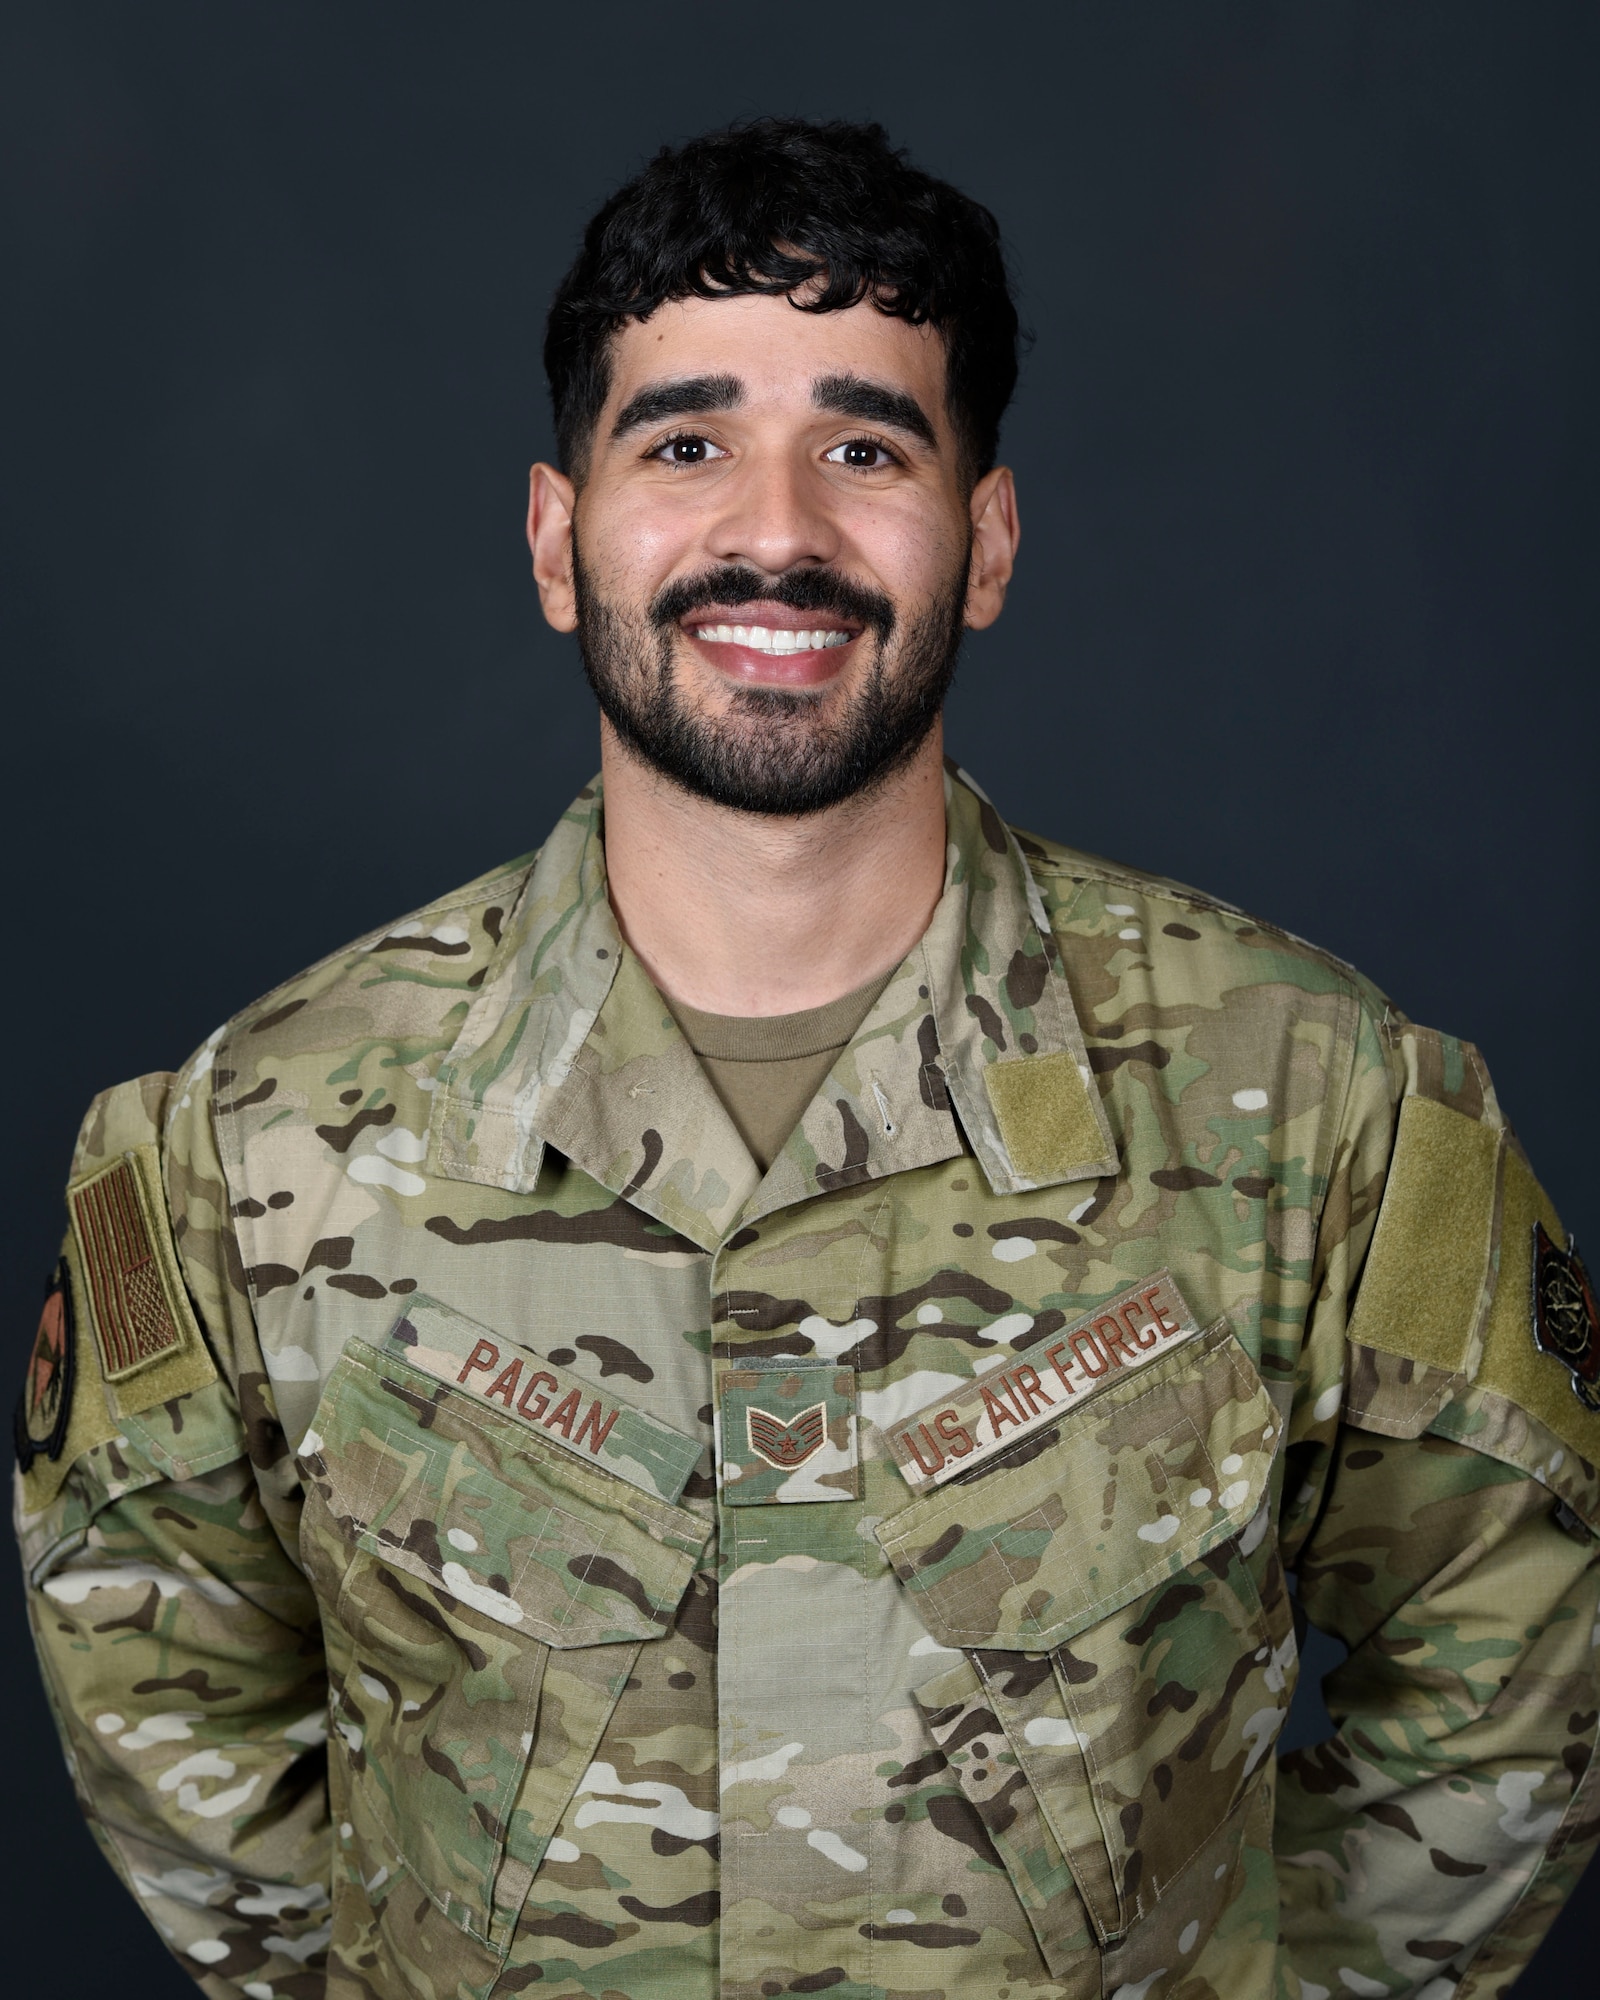 Air Force Staff Sgt. Gianfranco Pagan poses for a portrait photo.